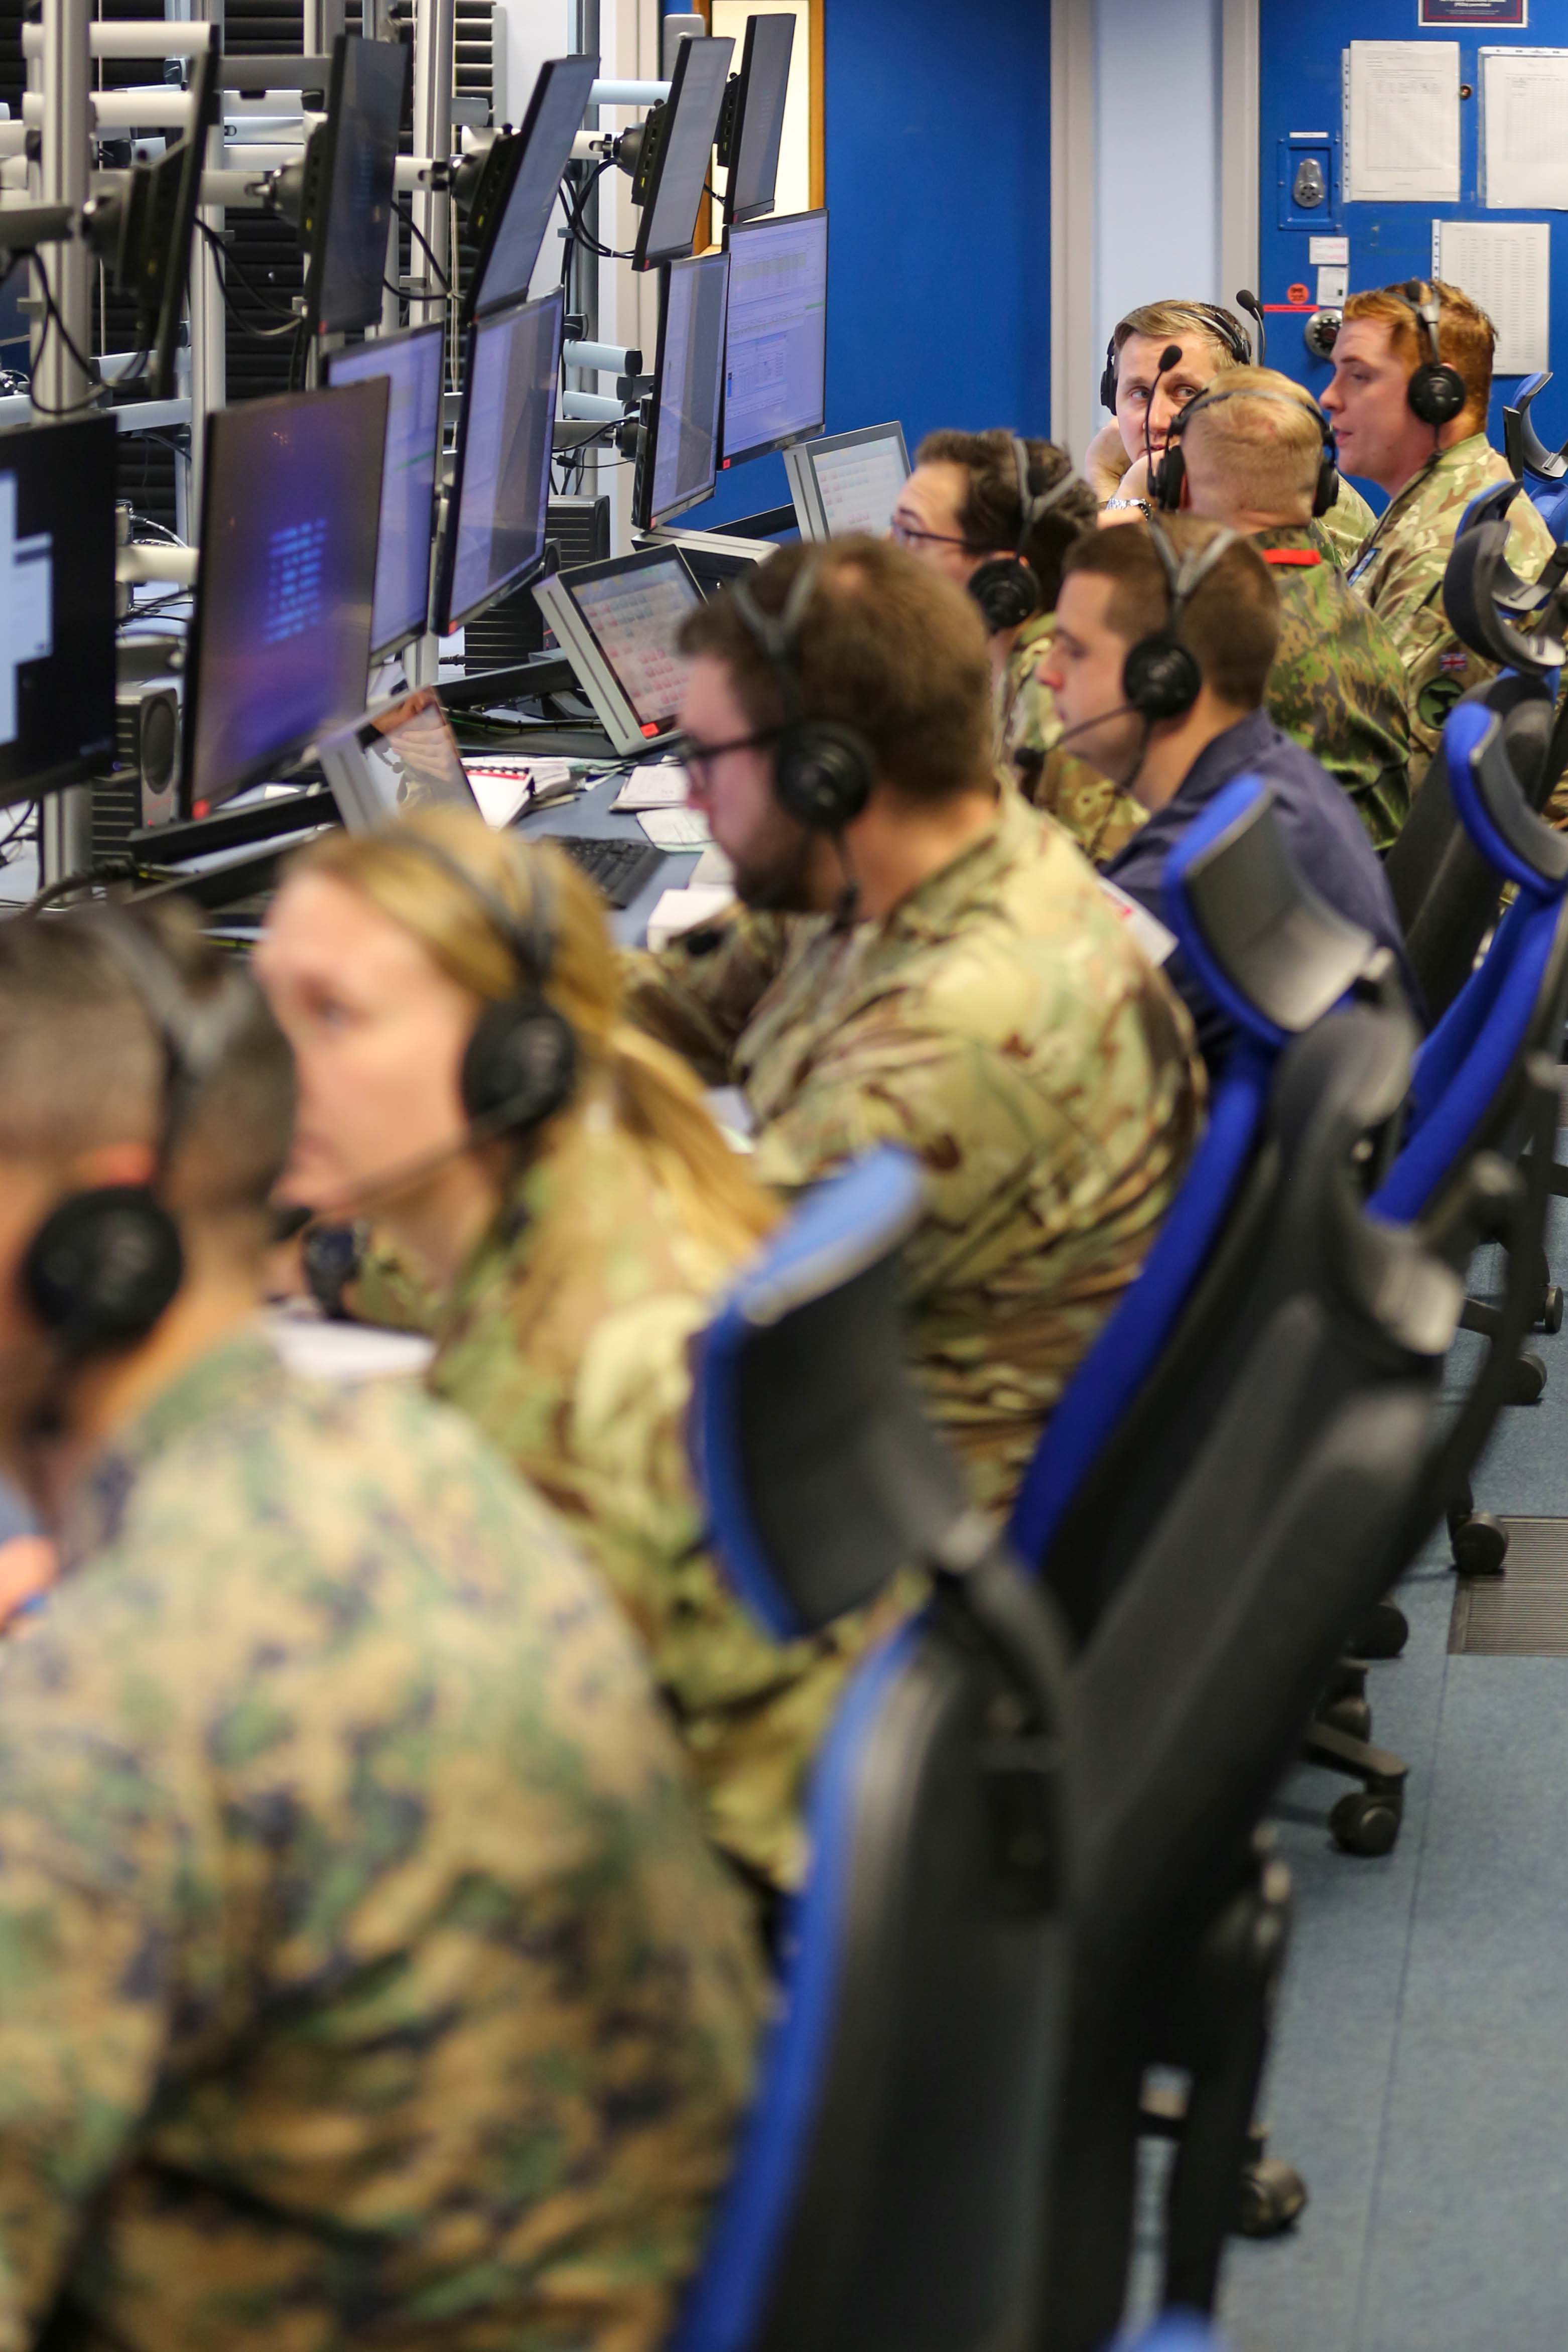 Image shows RAF personnel sitting at computer desks with headsets on.